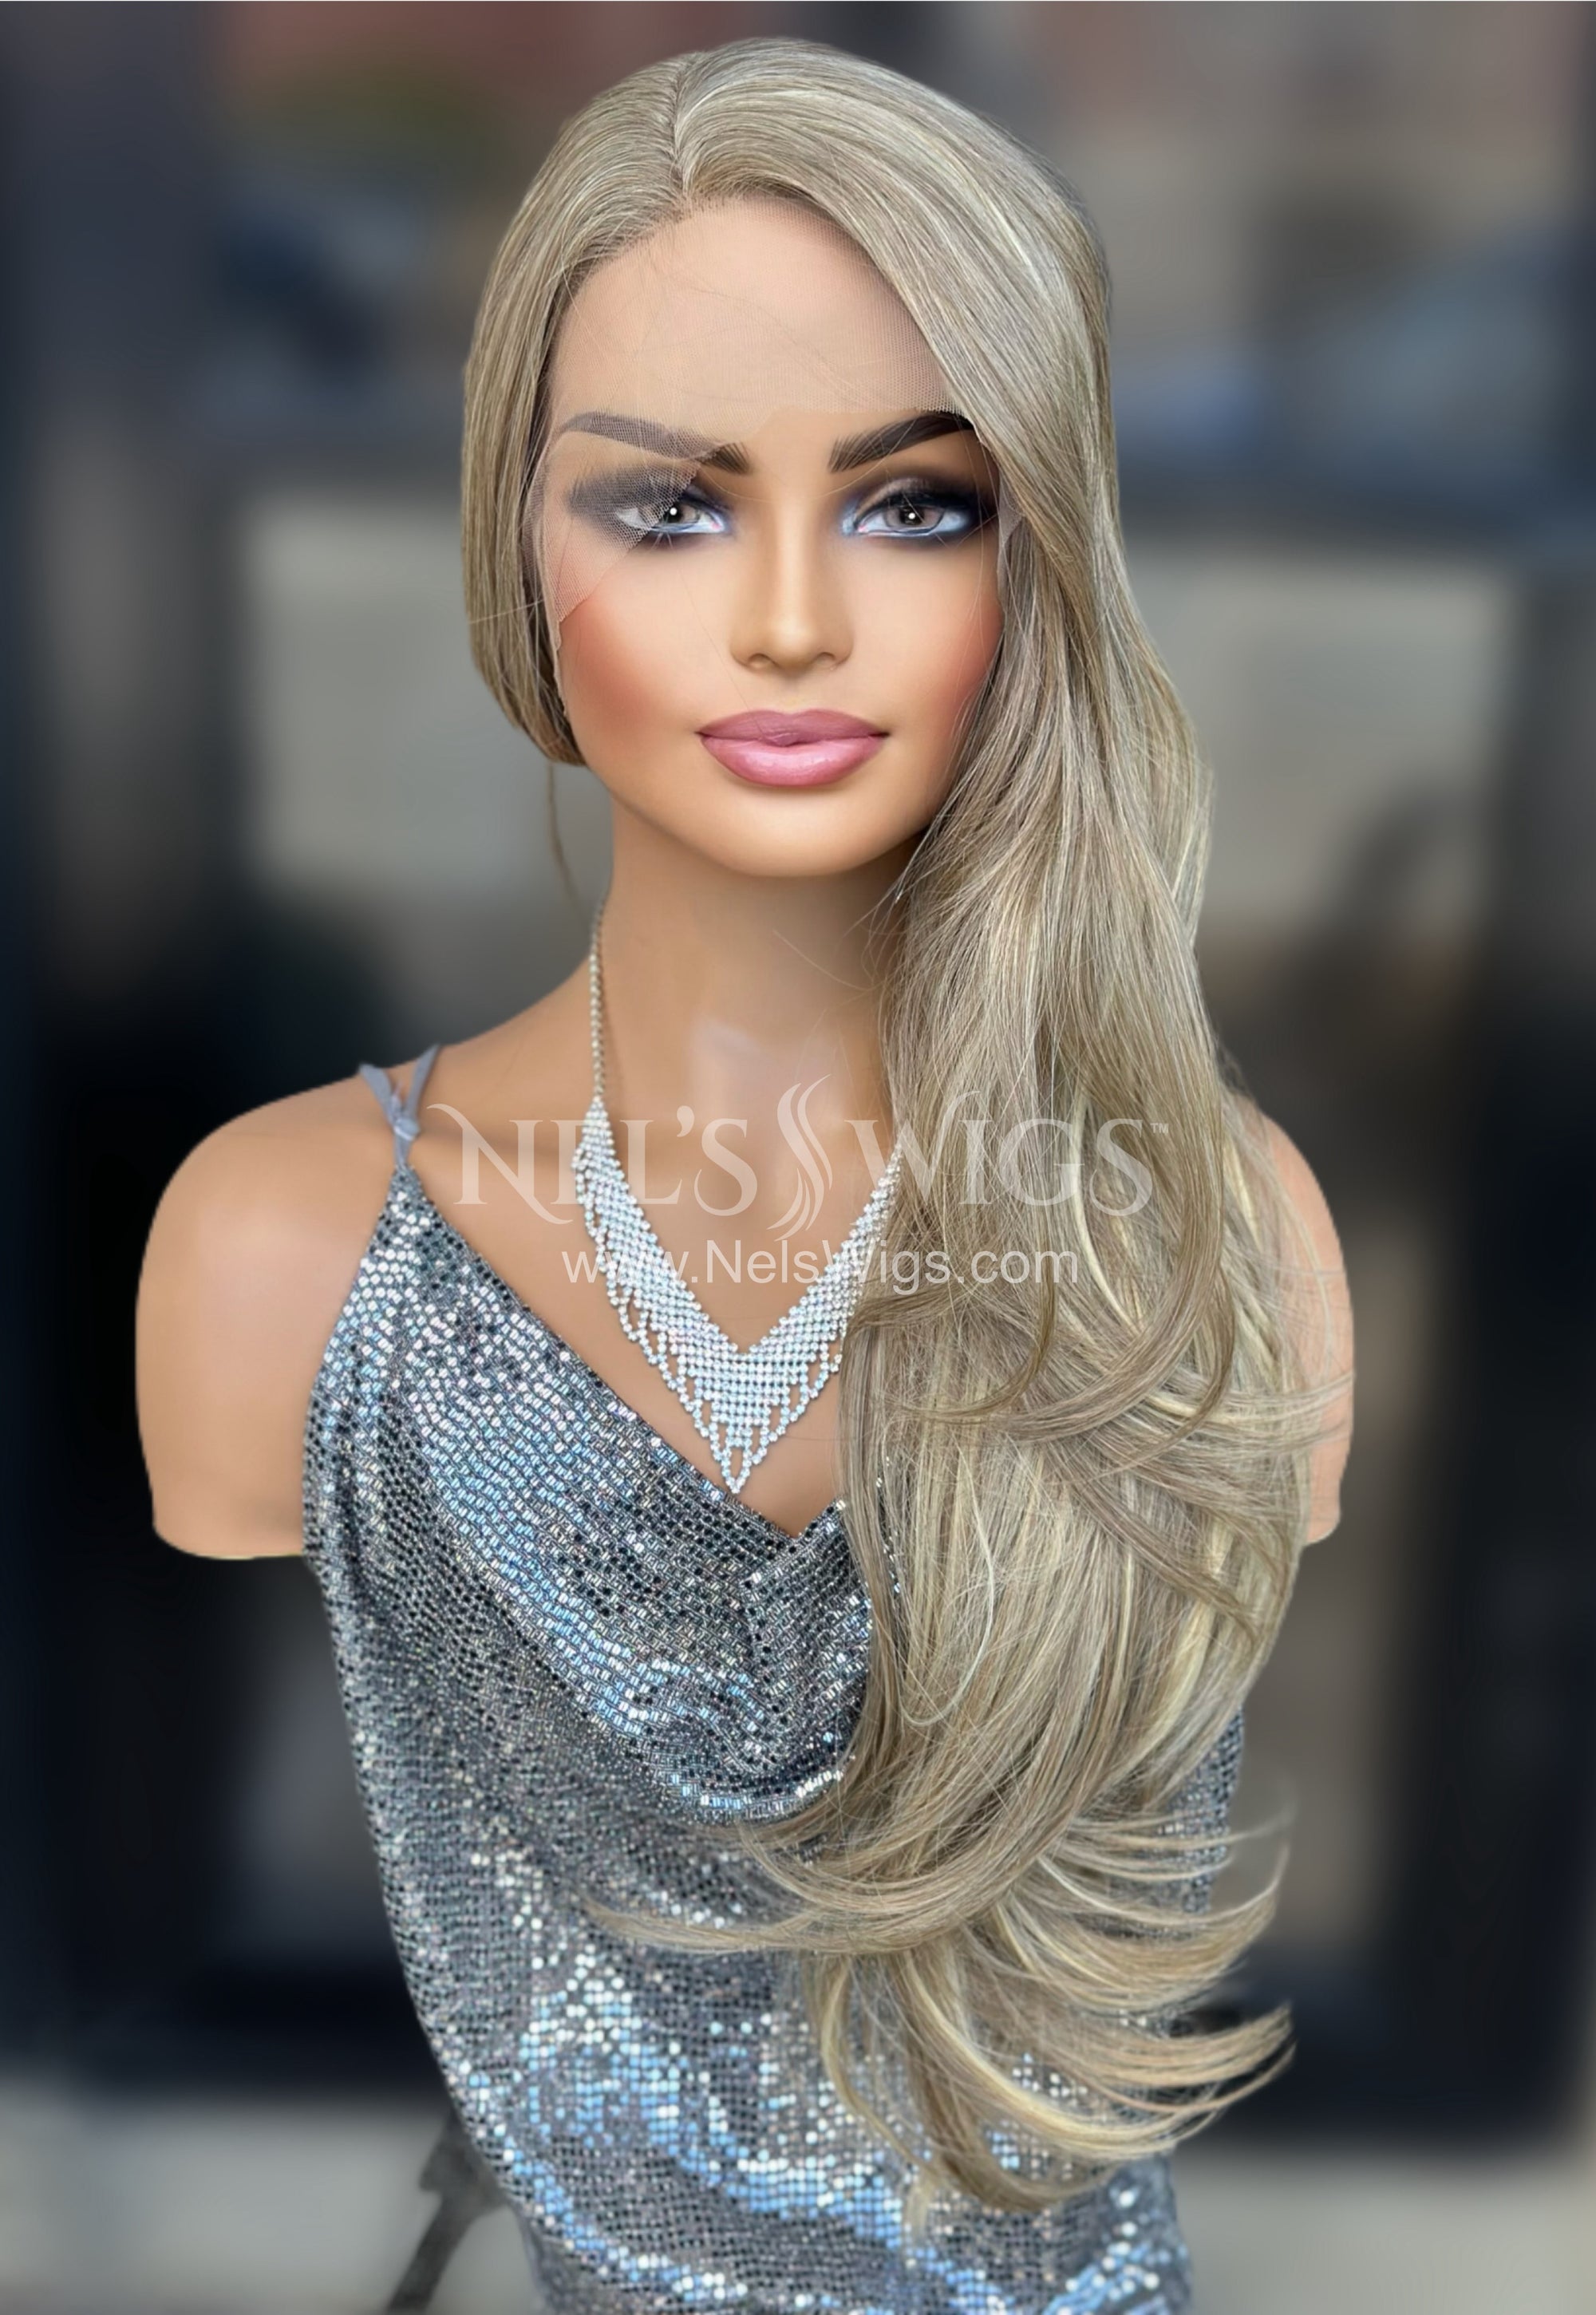 Dee - Blonde with Highlights